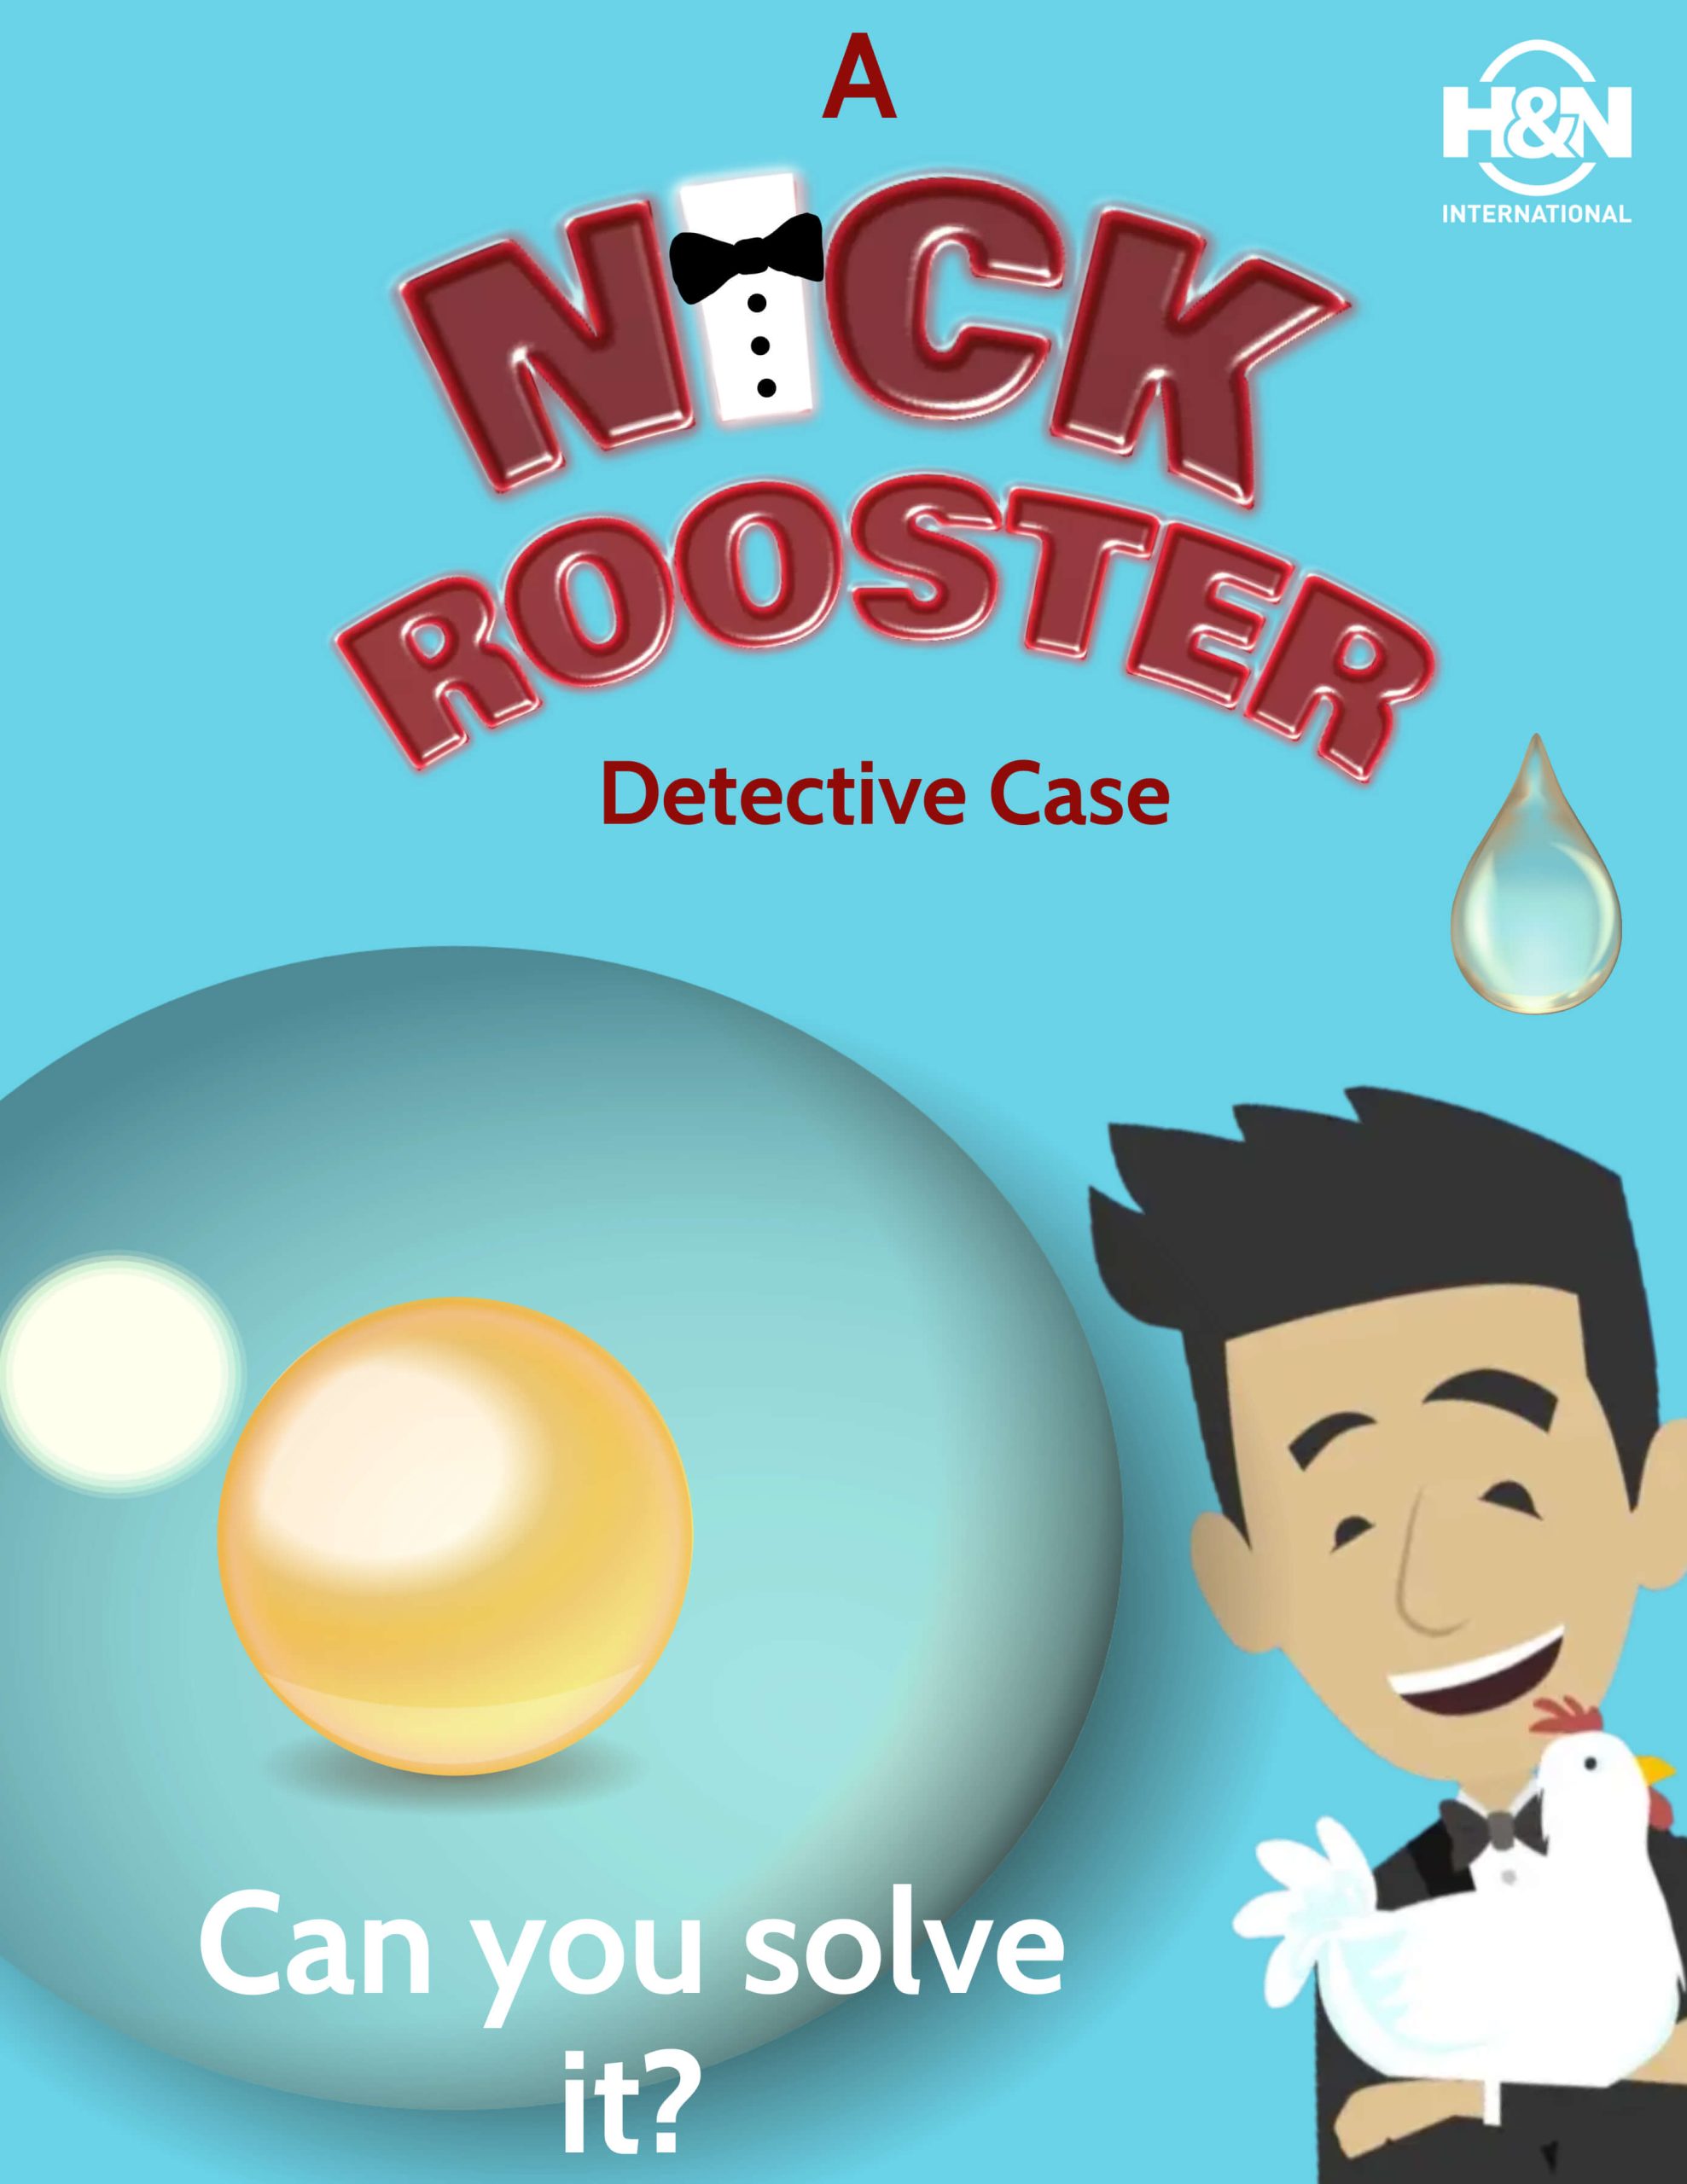 Nick Rooster case no. 13